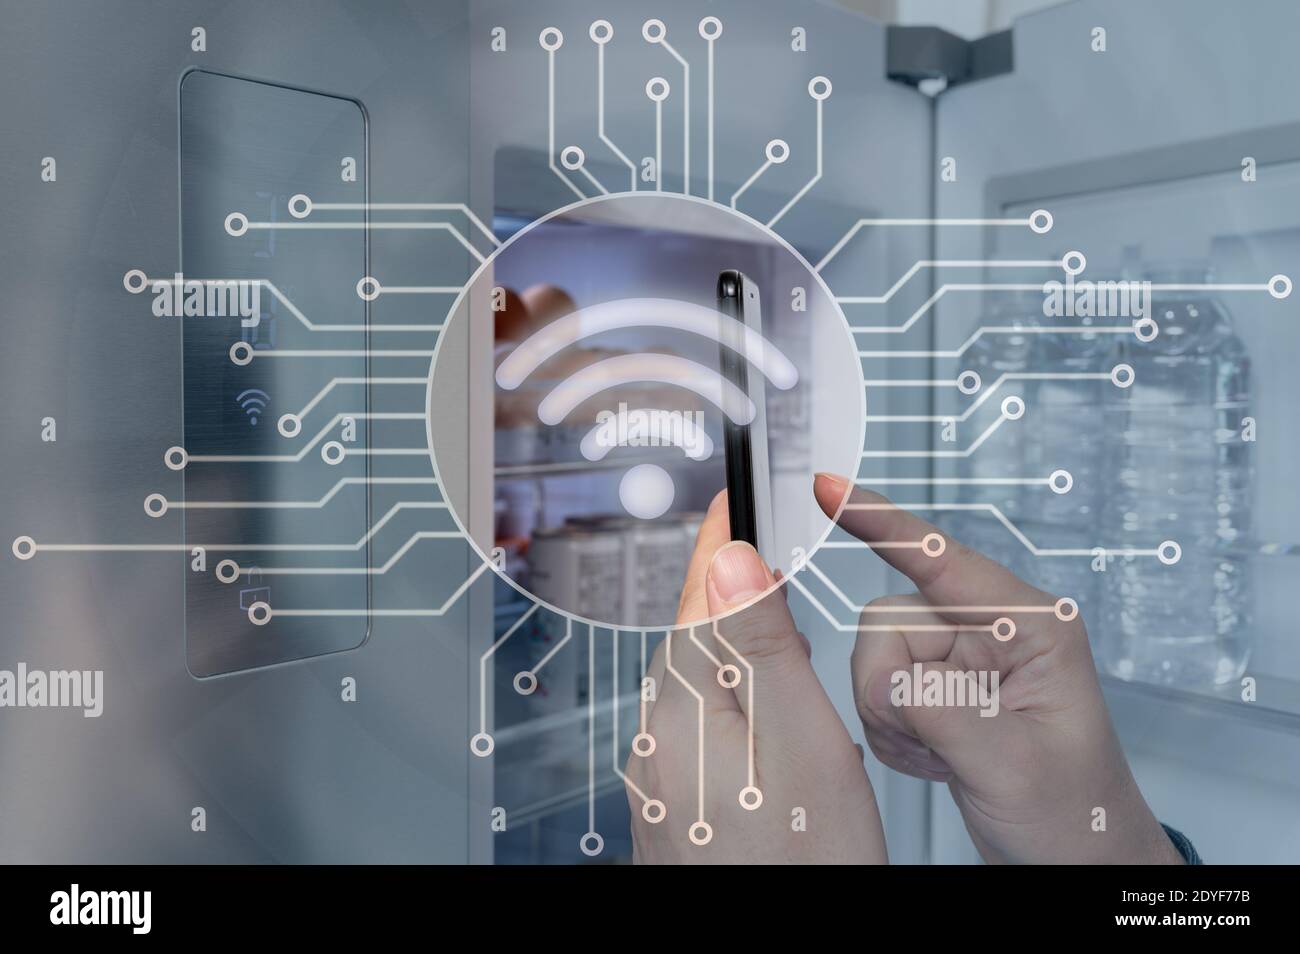 The hand of the man who controls the refrigerator with his smartphone. Internet of Things Concept Stock Photo